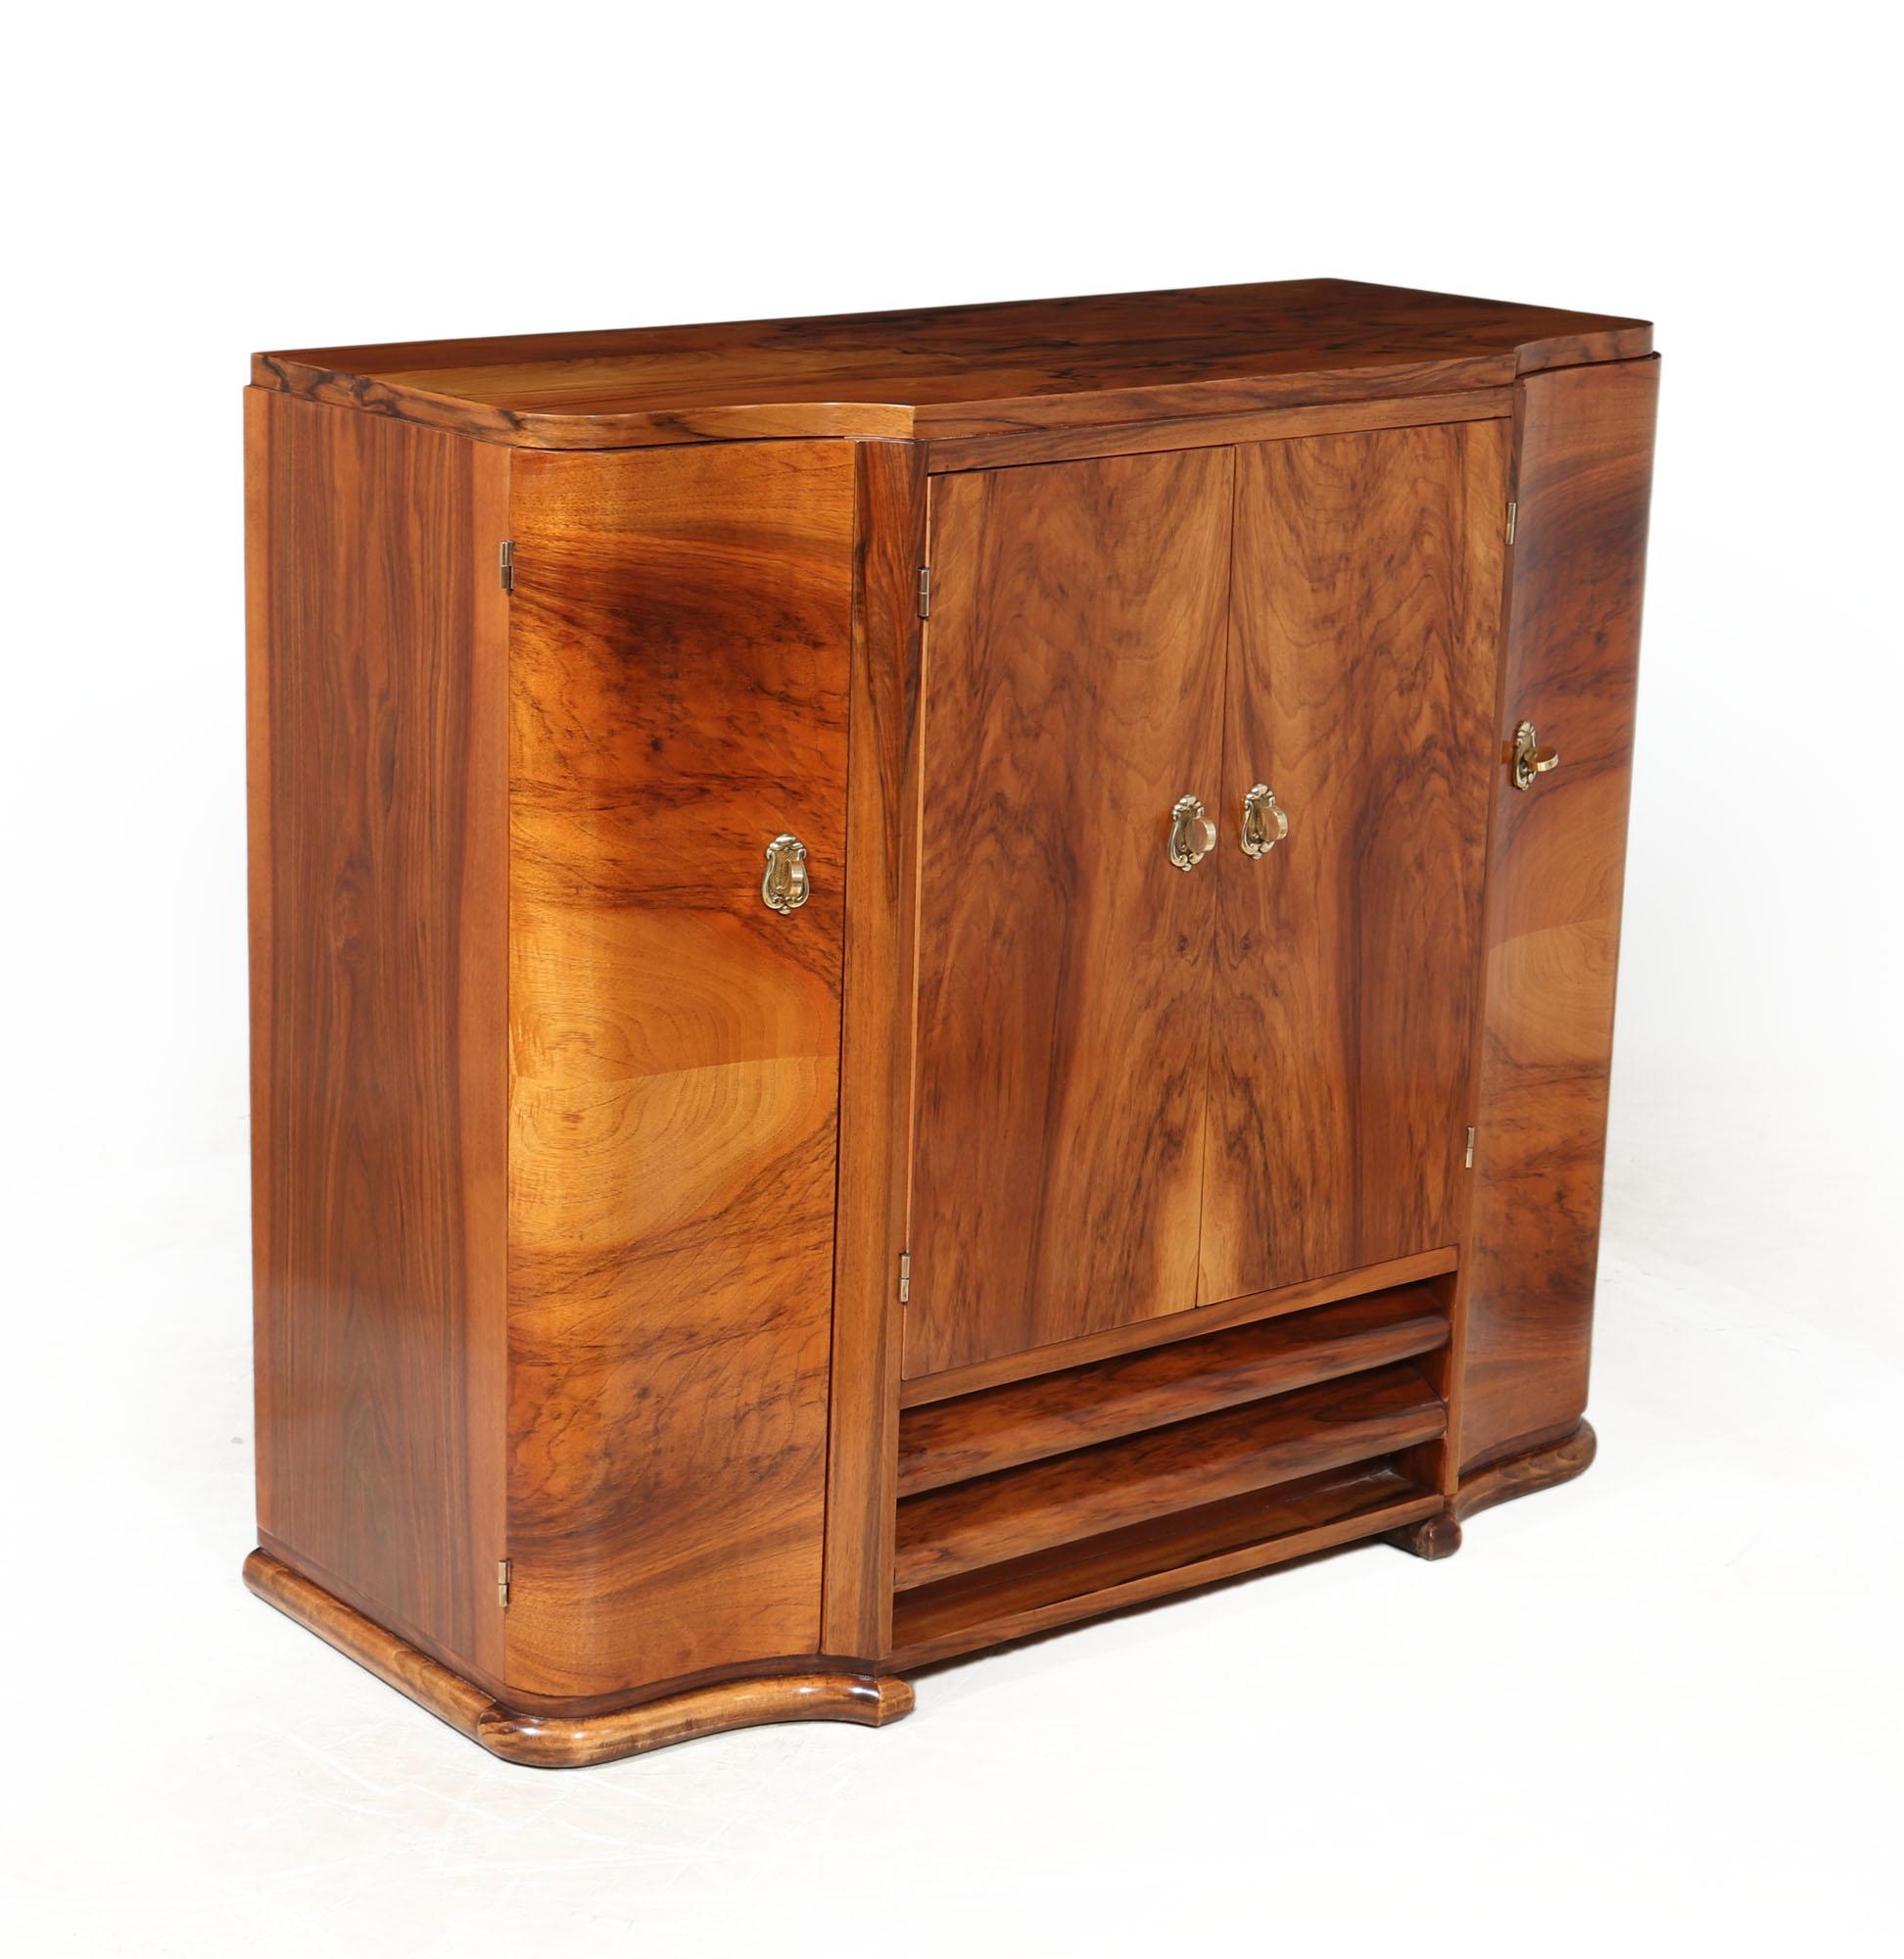 ITALIAN ART DECO CABINET IN WALNUT
A small Art Deco sideboard or buffet produced in walnut in the 1930’s in Italy, the cabinet has a serpentine shaped front and four doors with shelves behind and brass handles, the sideboard has been carefully